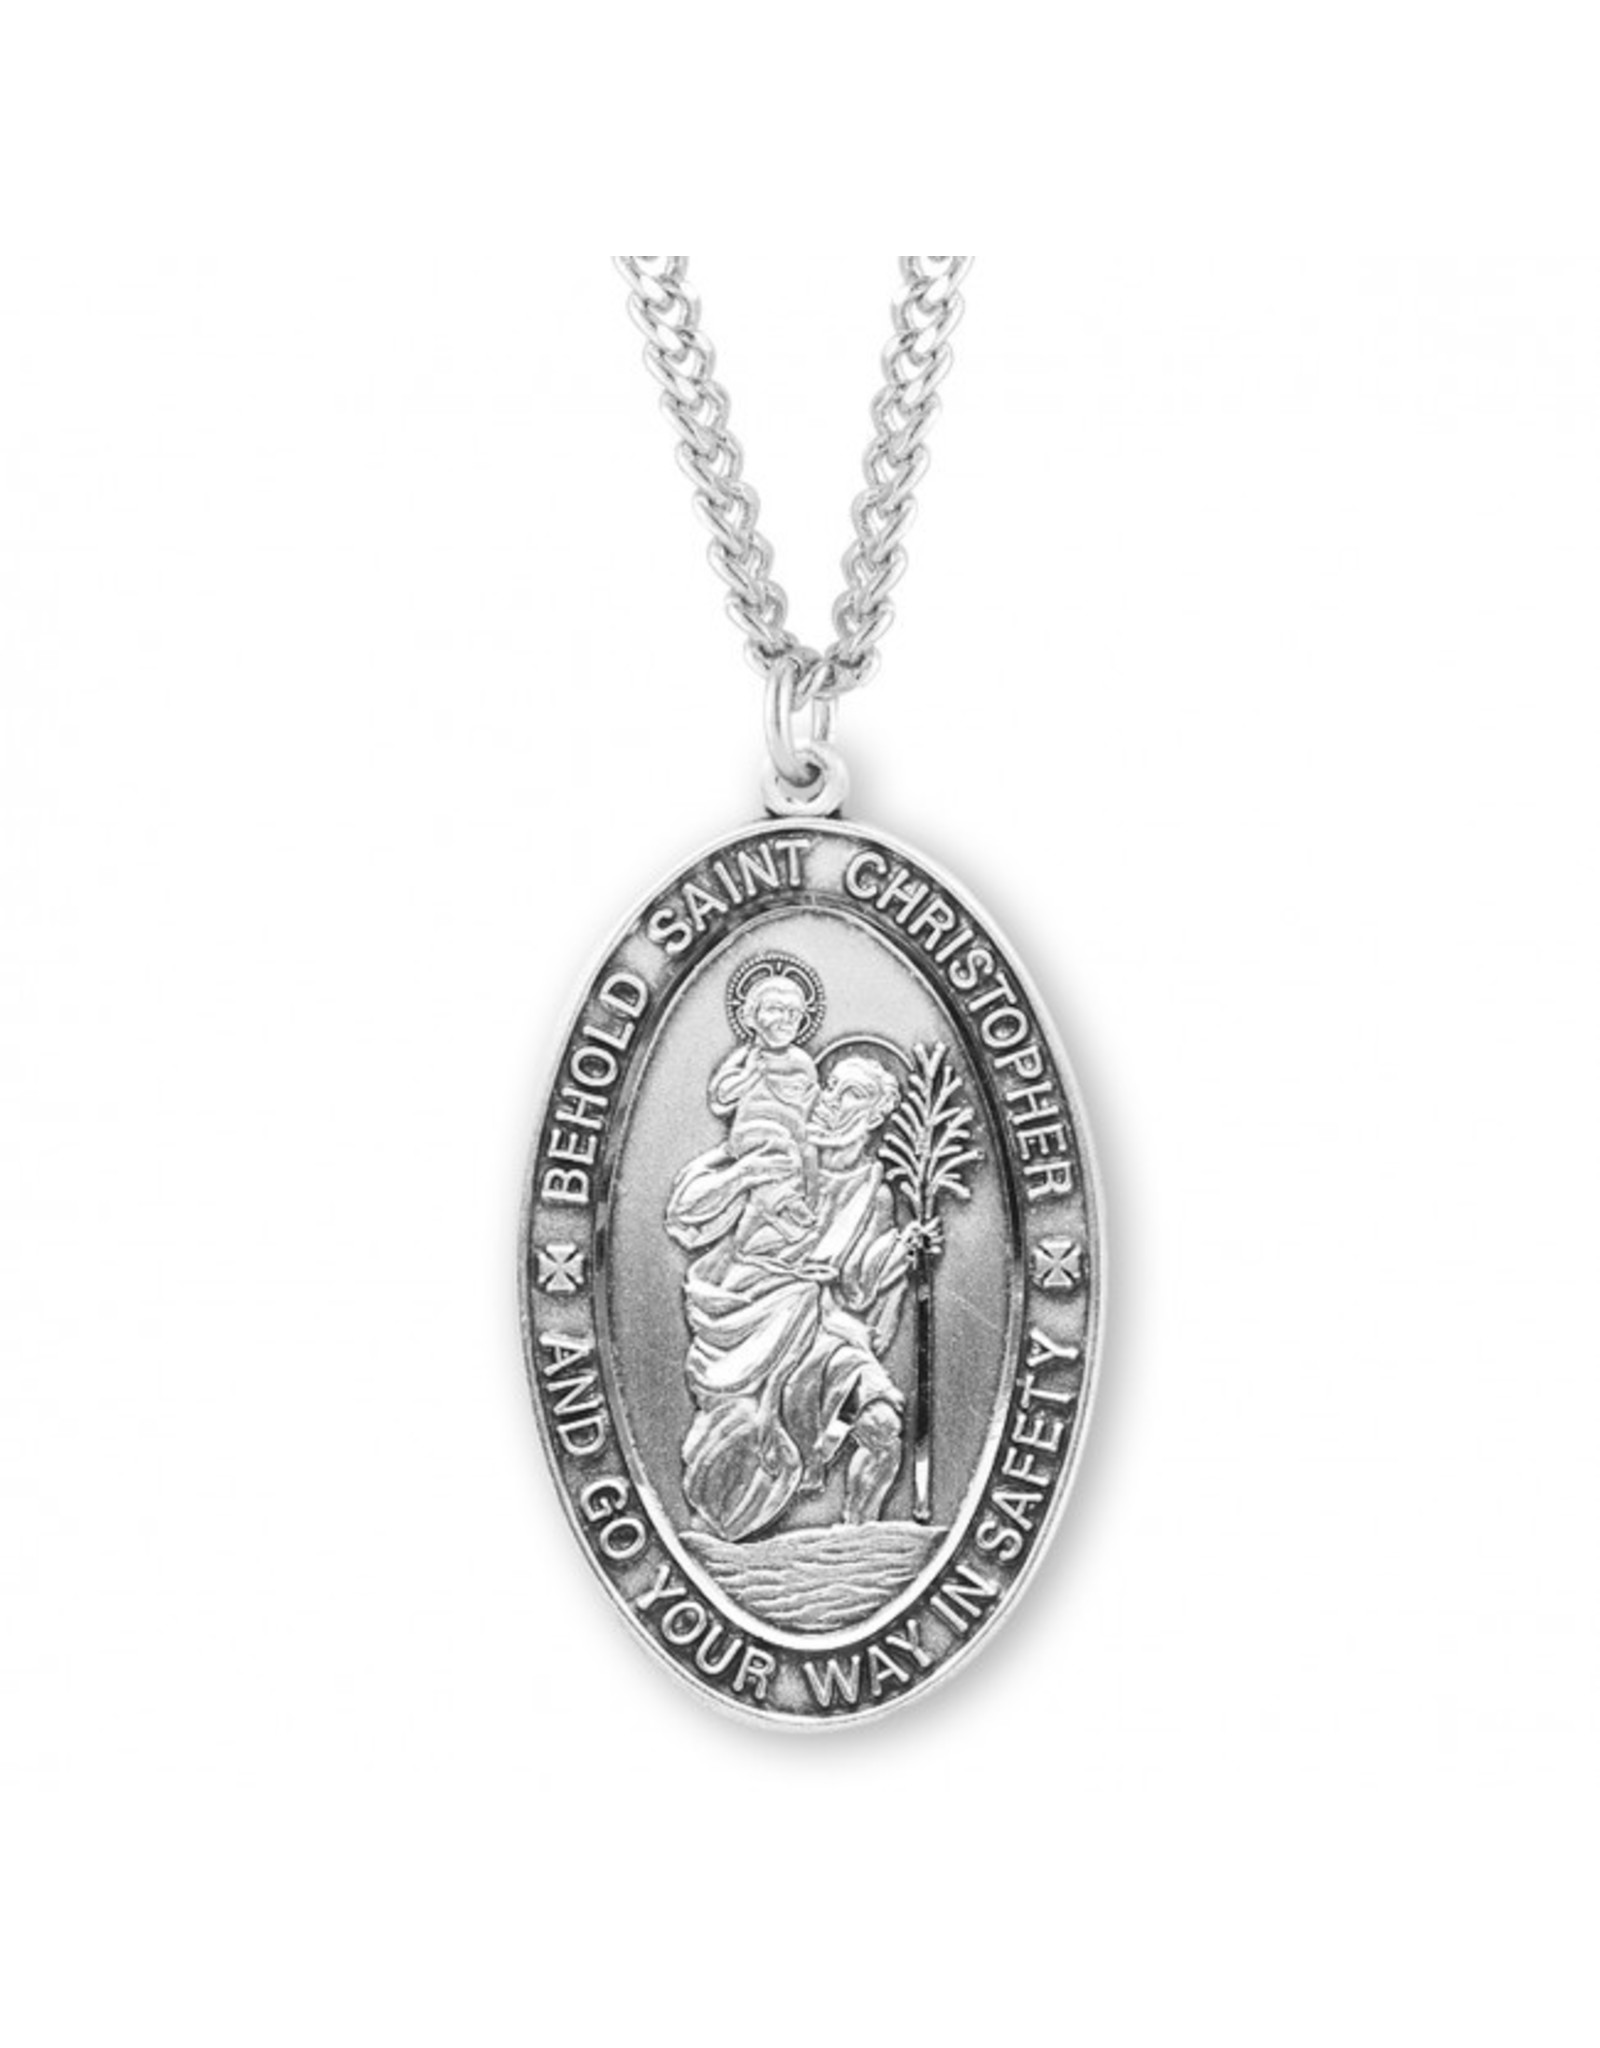 St. Christopher Oval Medal, Sterling Silver, 24" Chain